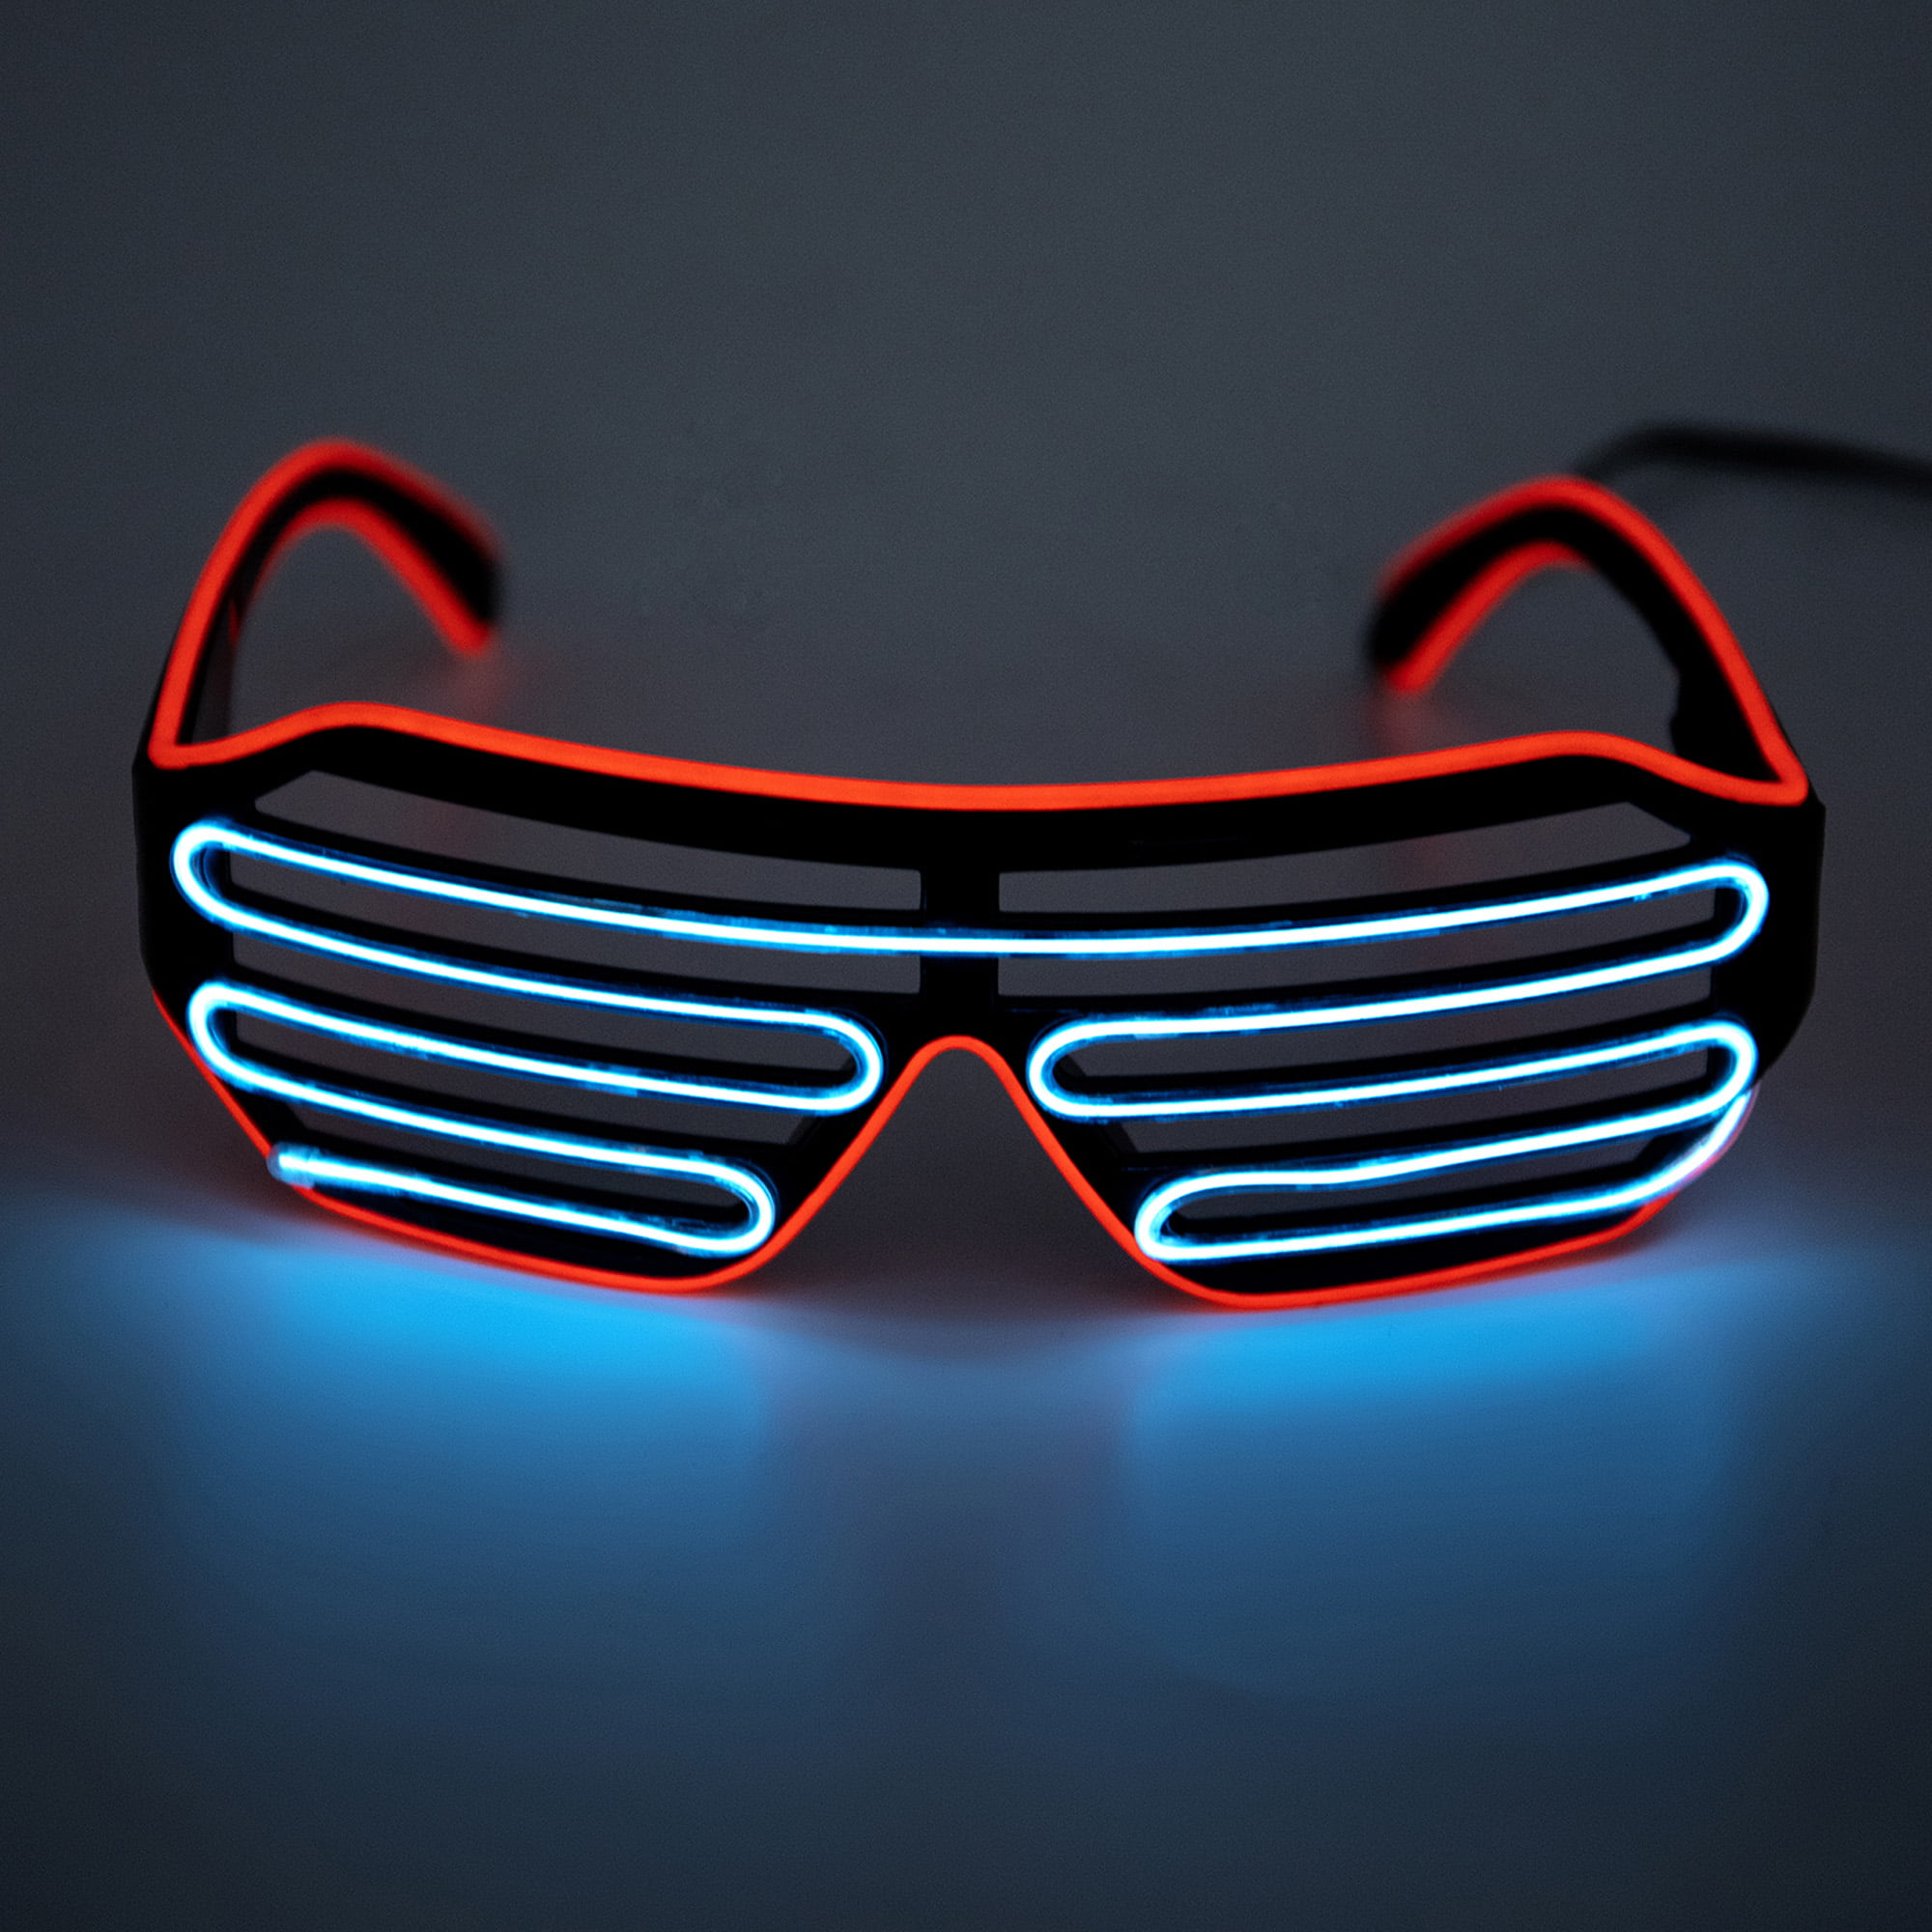 Neon LED Light Up Shutter EL Wire Glasses Glow Frame Dance Party Nightclub Hot